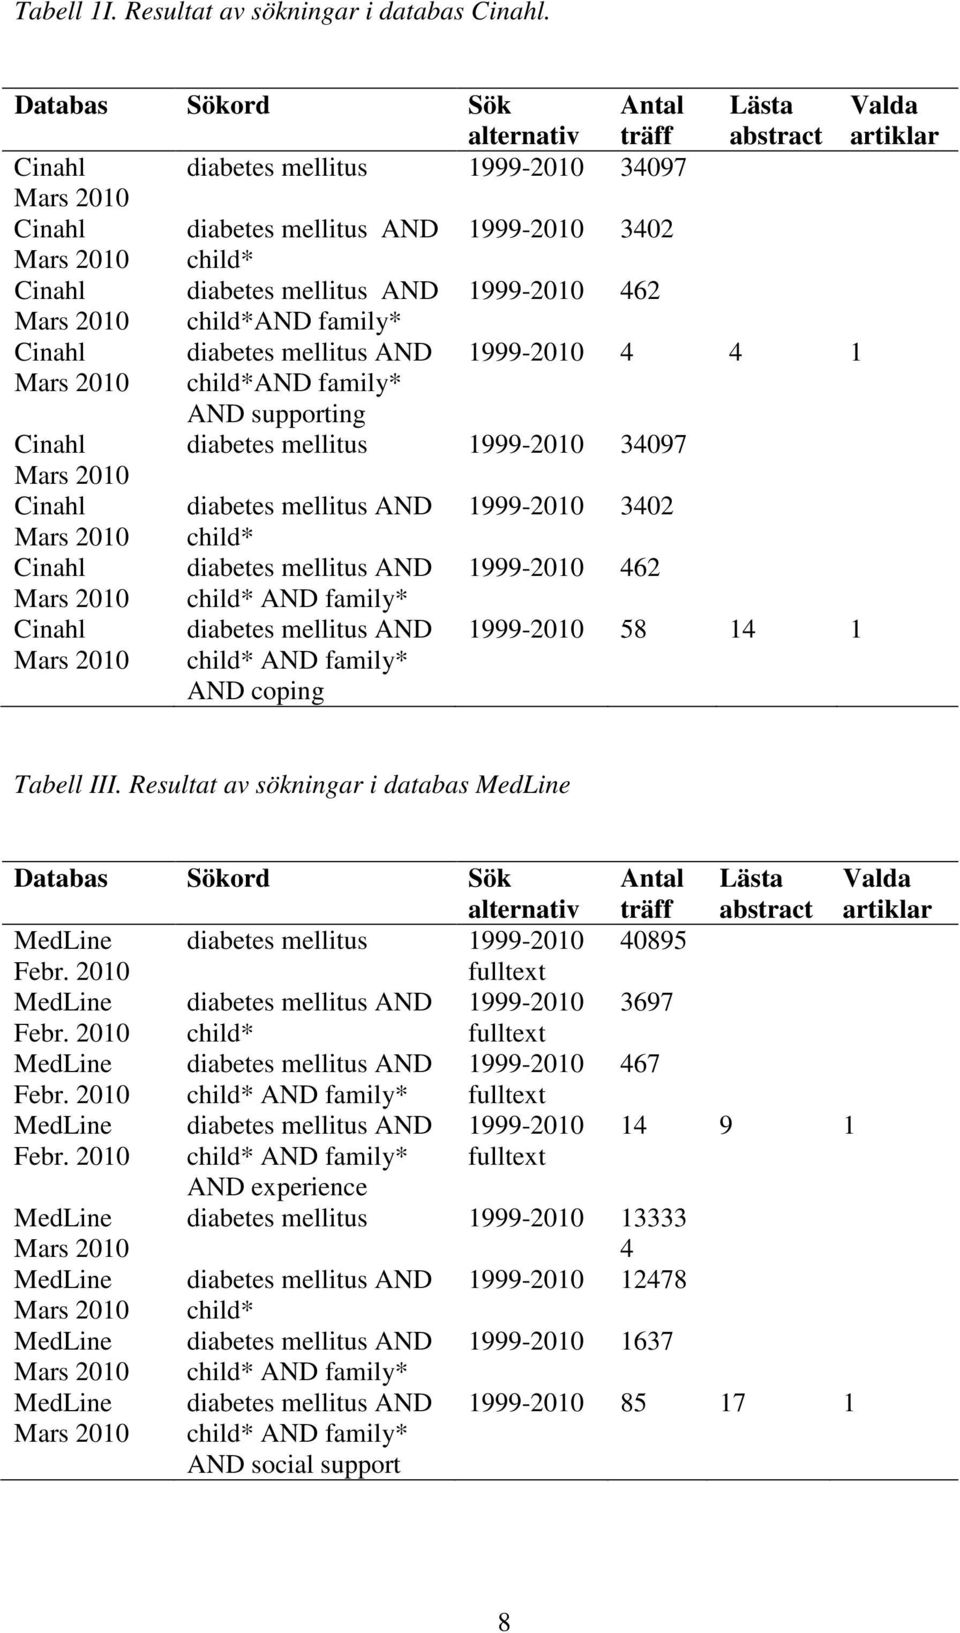 mellitus AND 1999-2010 462 Mars 2010 child*and family* Cinahl diabetes mellitus AND 1999-2010 4 4 1 Mars 2010 child*and family* AND supporting Cinahl diabetes mellitus 1999-2010 34097 Mars 2010